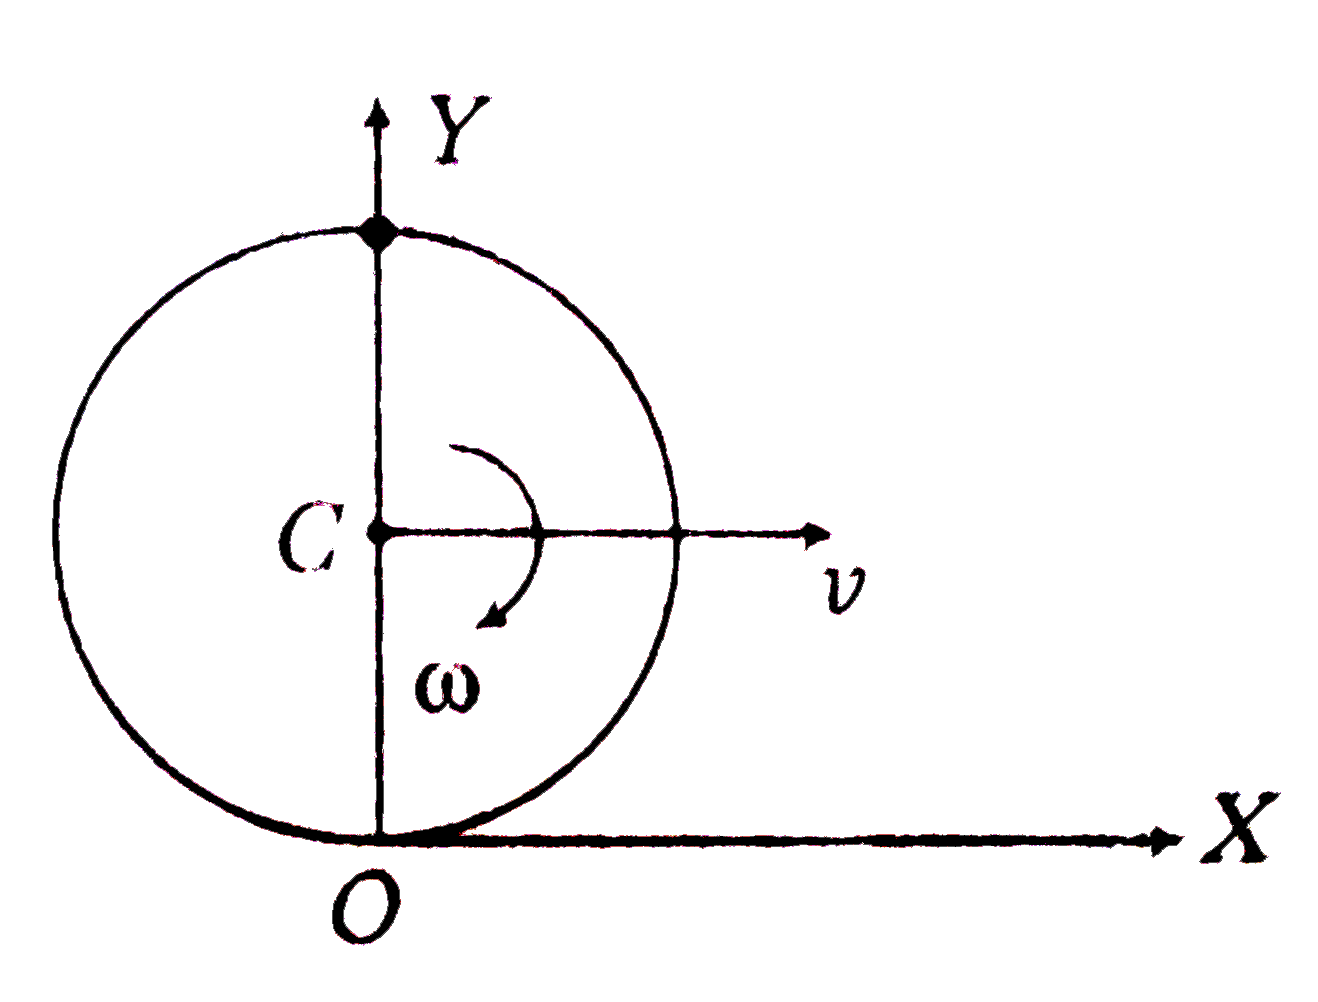 A disc of radius R start at time t=0 moving along the positive X-axis with linear speed v and angular speed omega. Find the x and y-coordinates of the bottommost point at any time t.